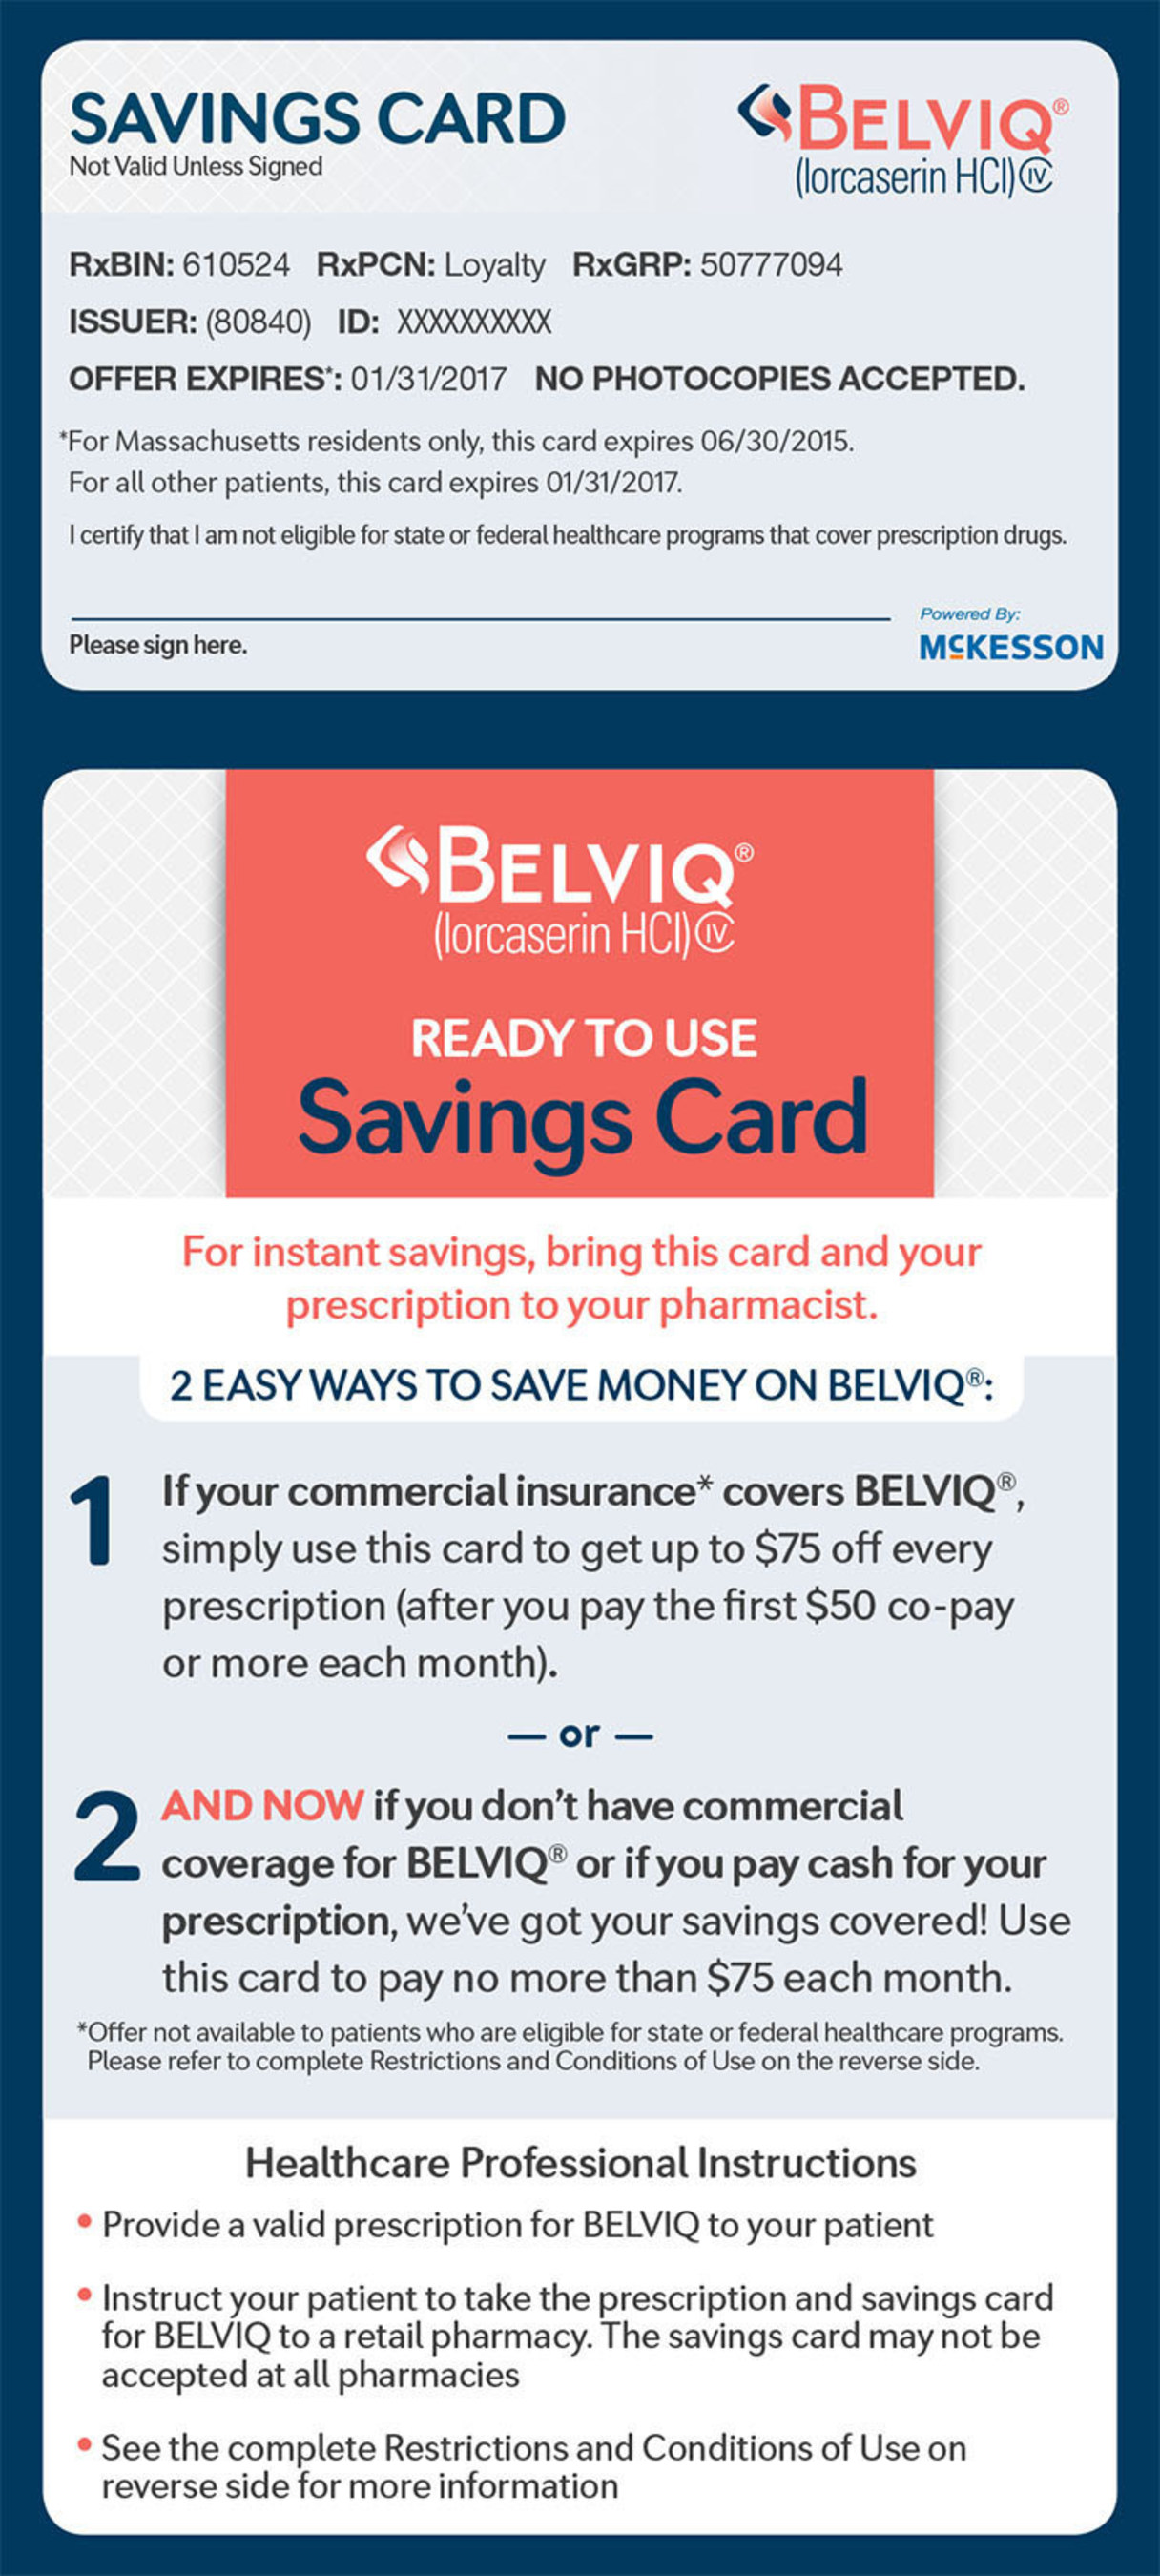 The Savings Card for BELVIQ(R) can be obtained at physician offices & pharmacies or via www.BELVIQ.com/registration/